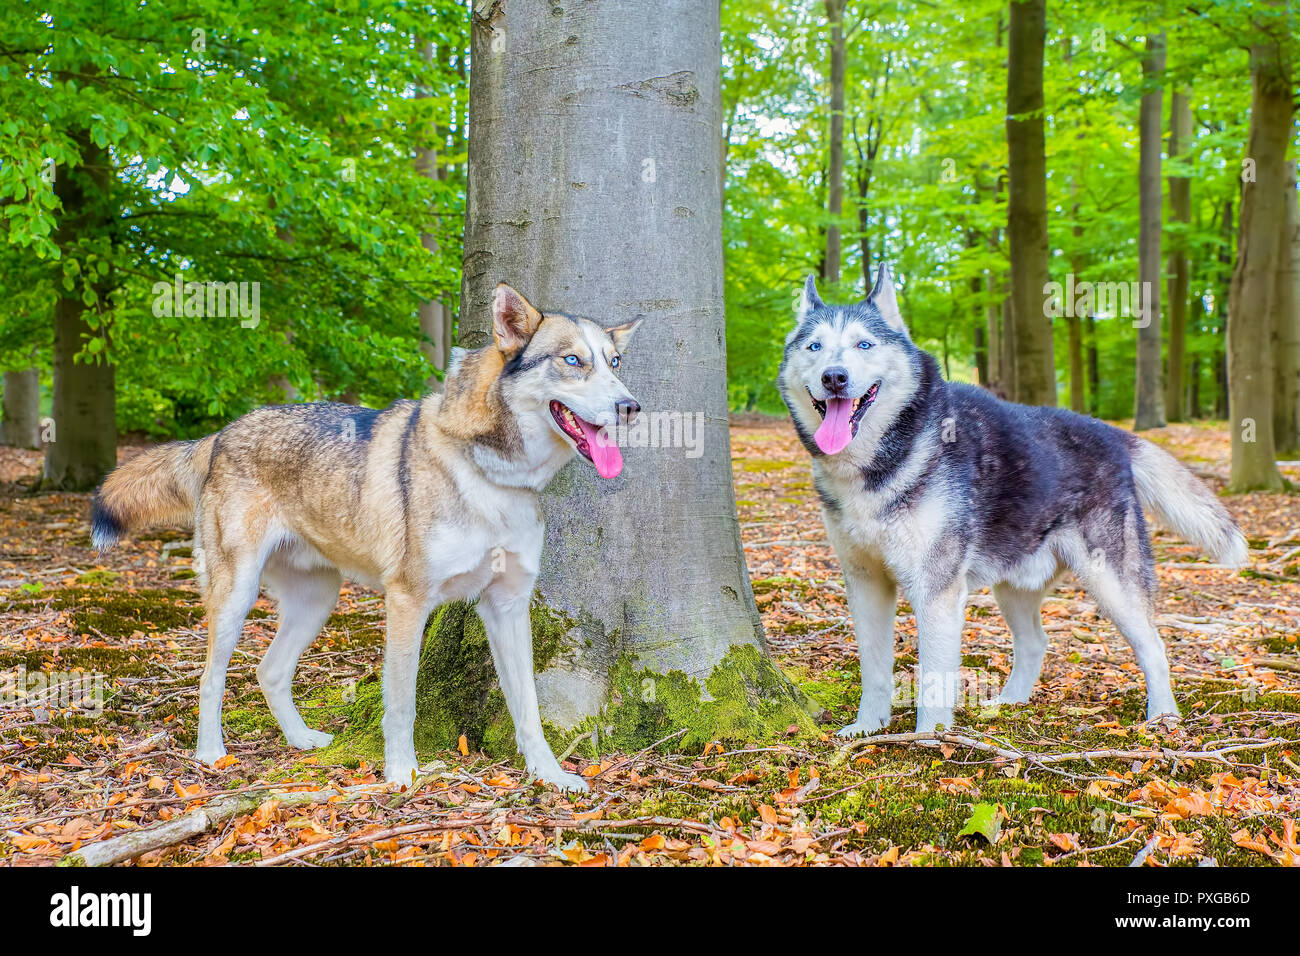 Two huskies standing together near beech trees Stock Photo